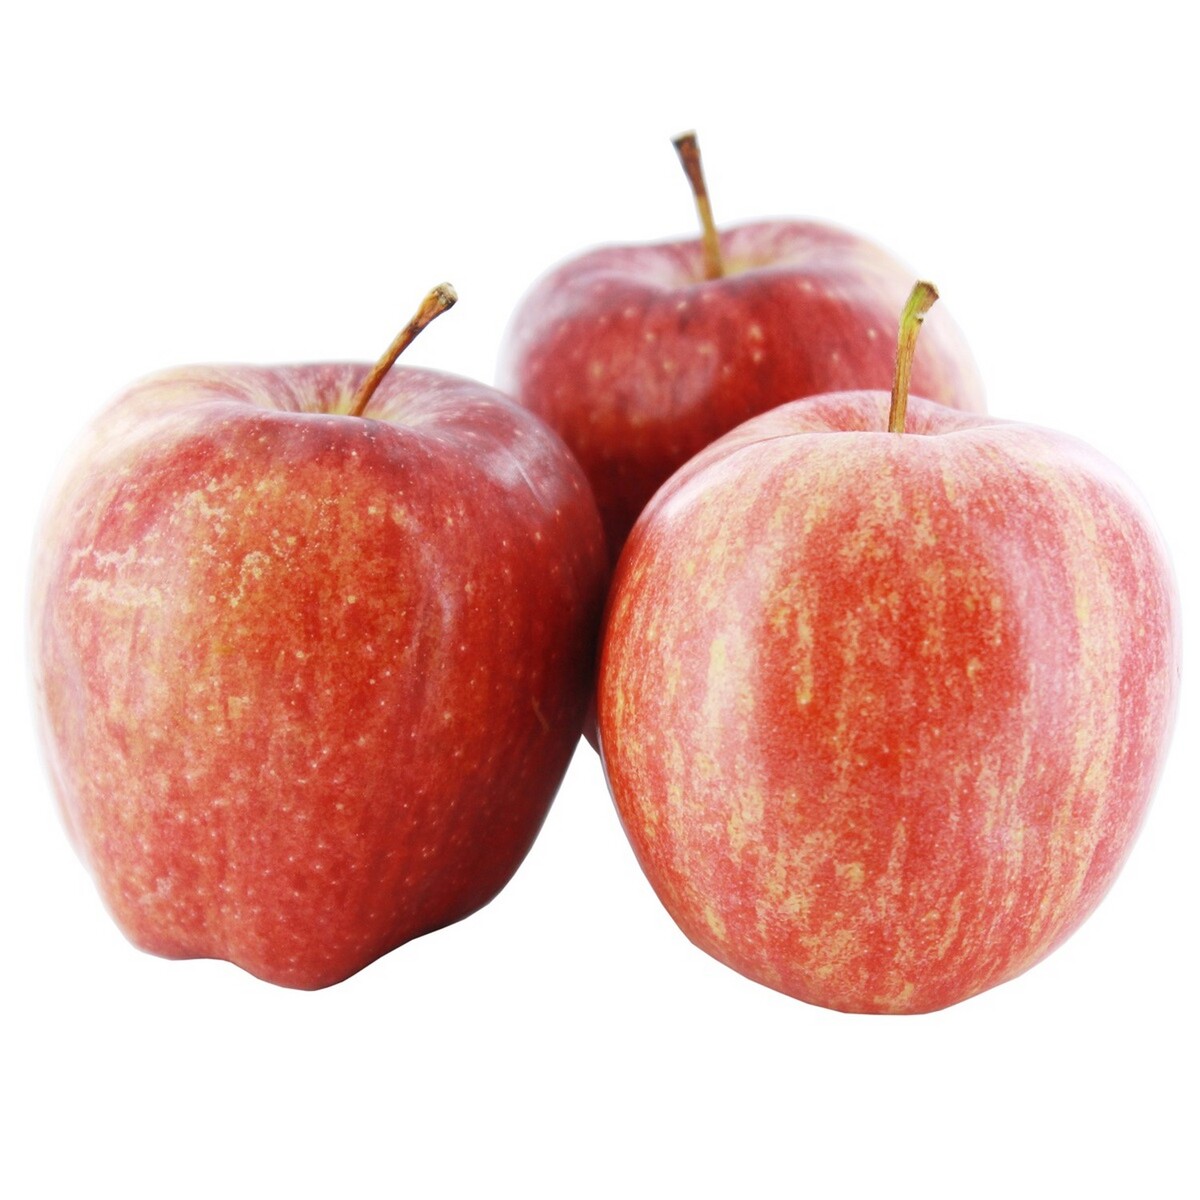 Apple Red Italy approx. approx. 450gm-500gm